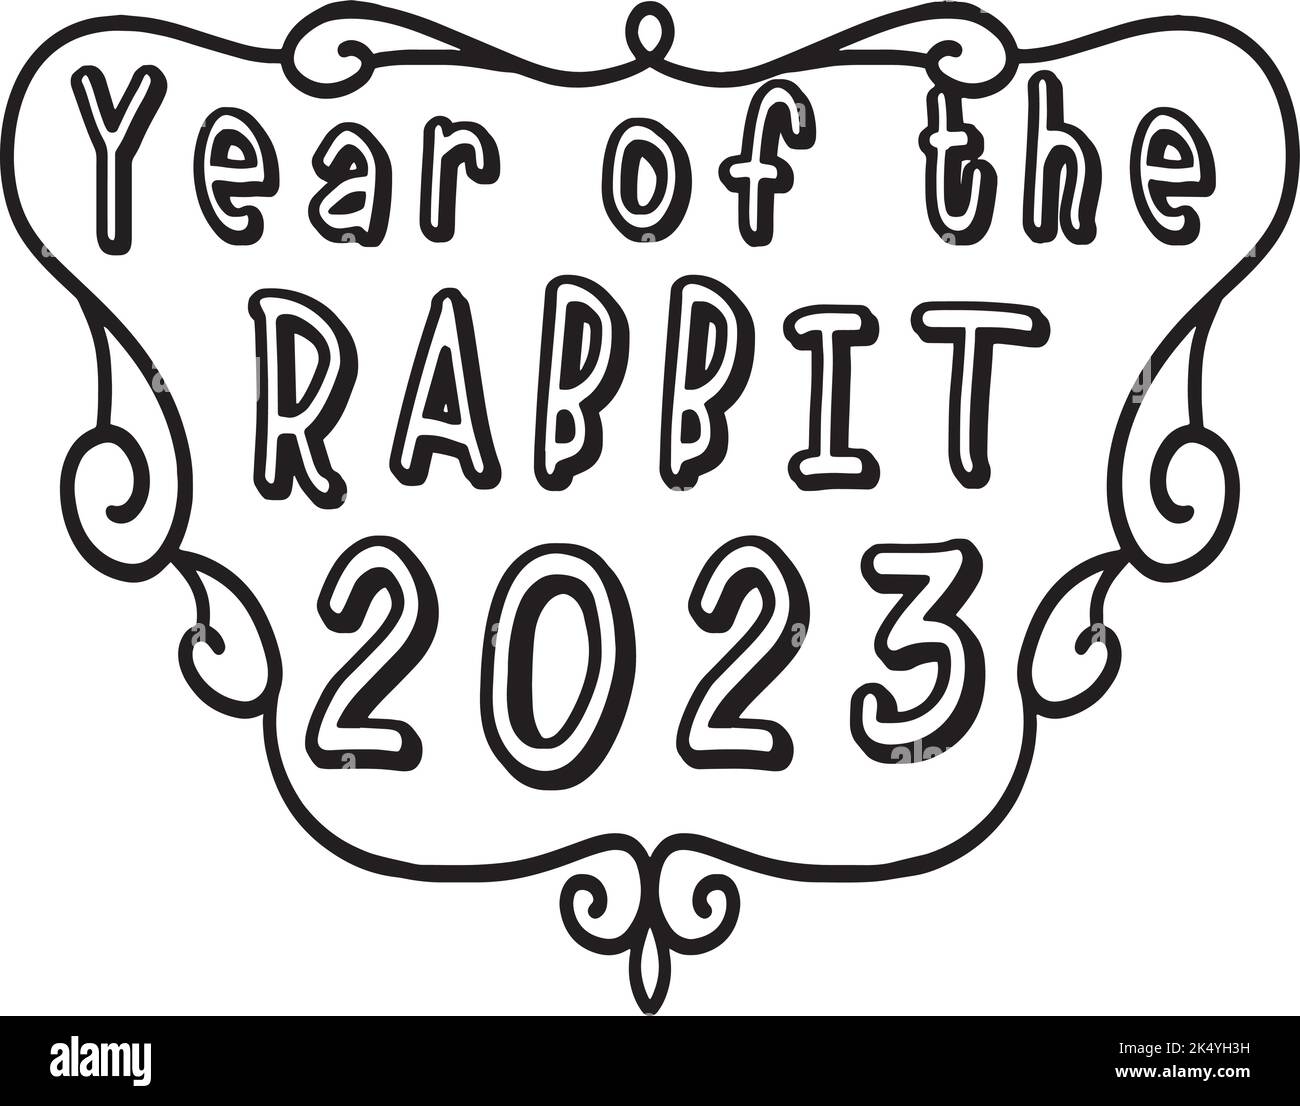 New Year 2023 Vector Black And White Stock Photos & Images - Alamy